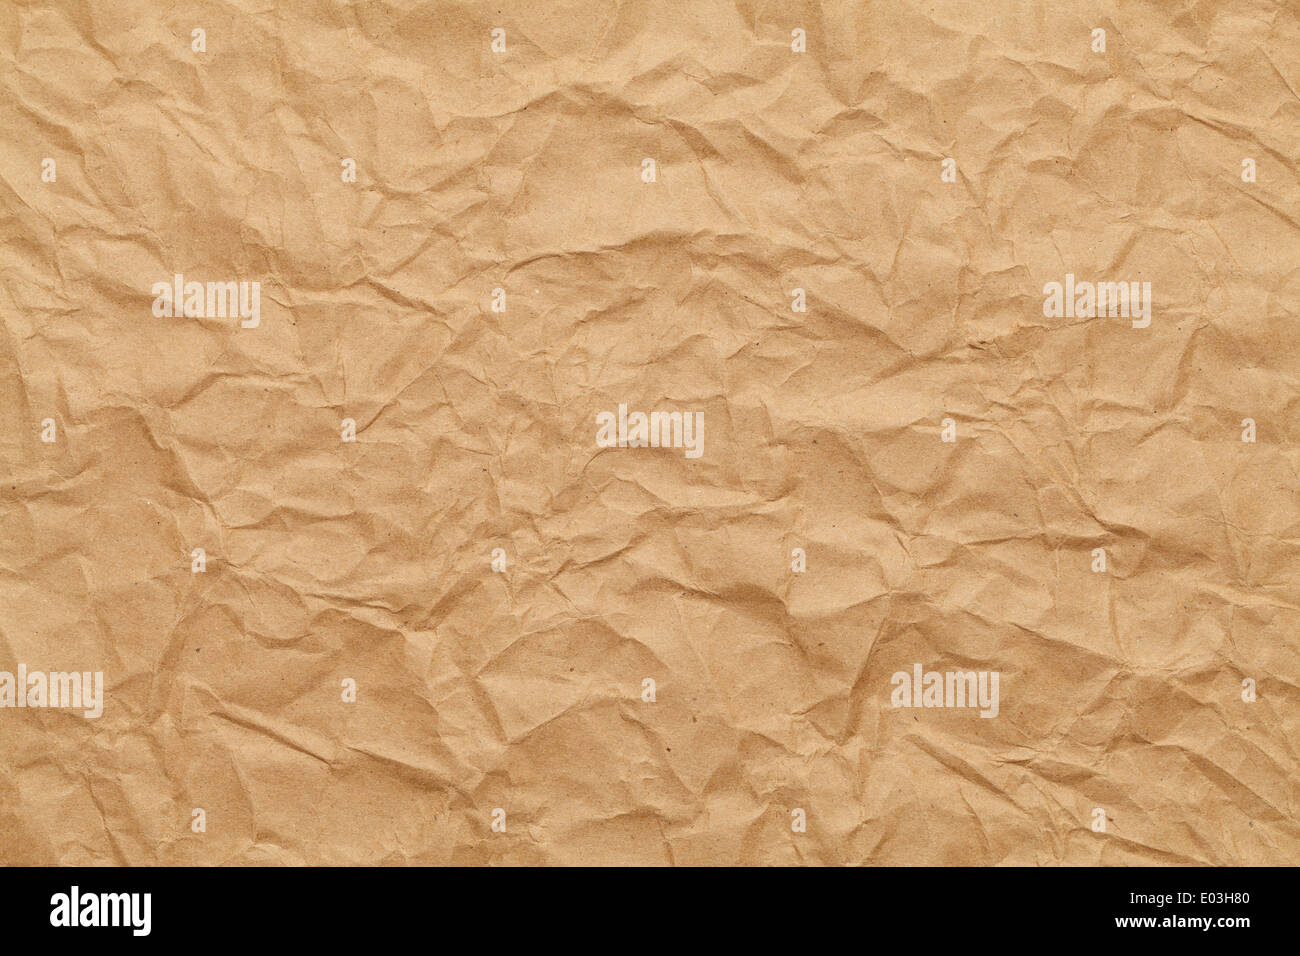 Crumpled Brown Packing Paper Background. Stock Photo